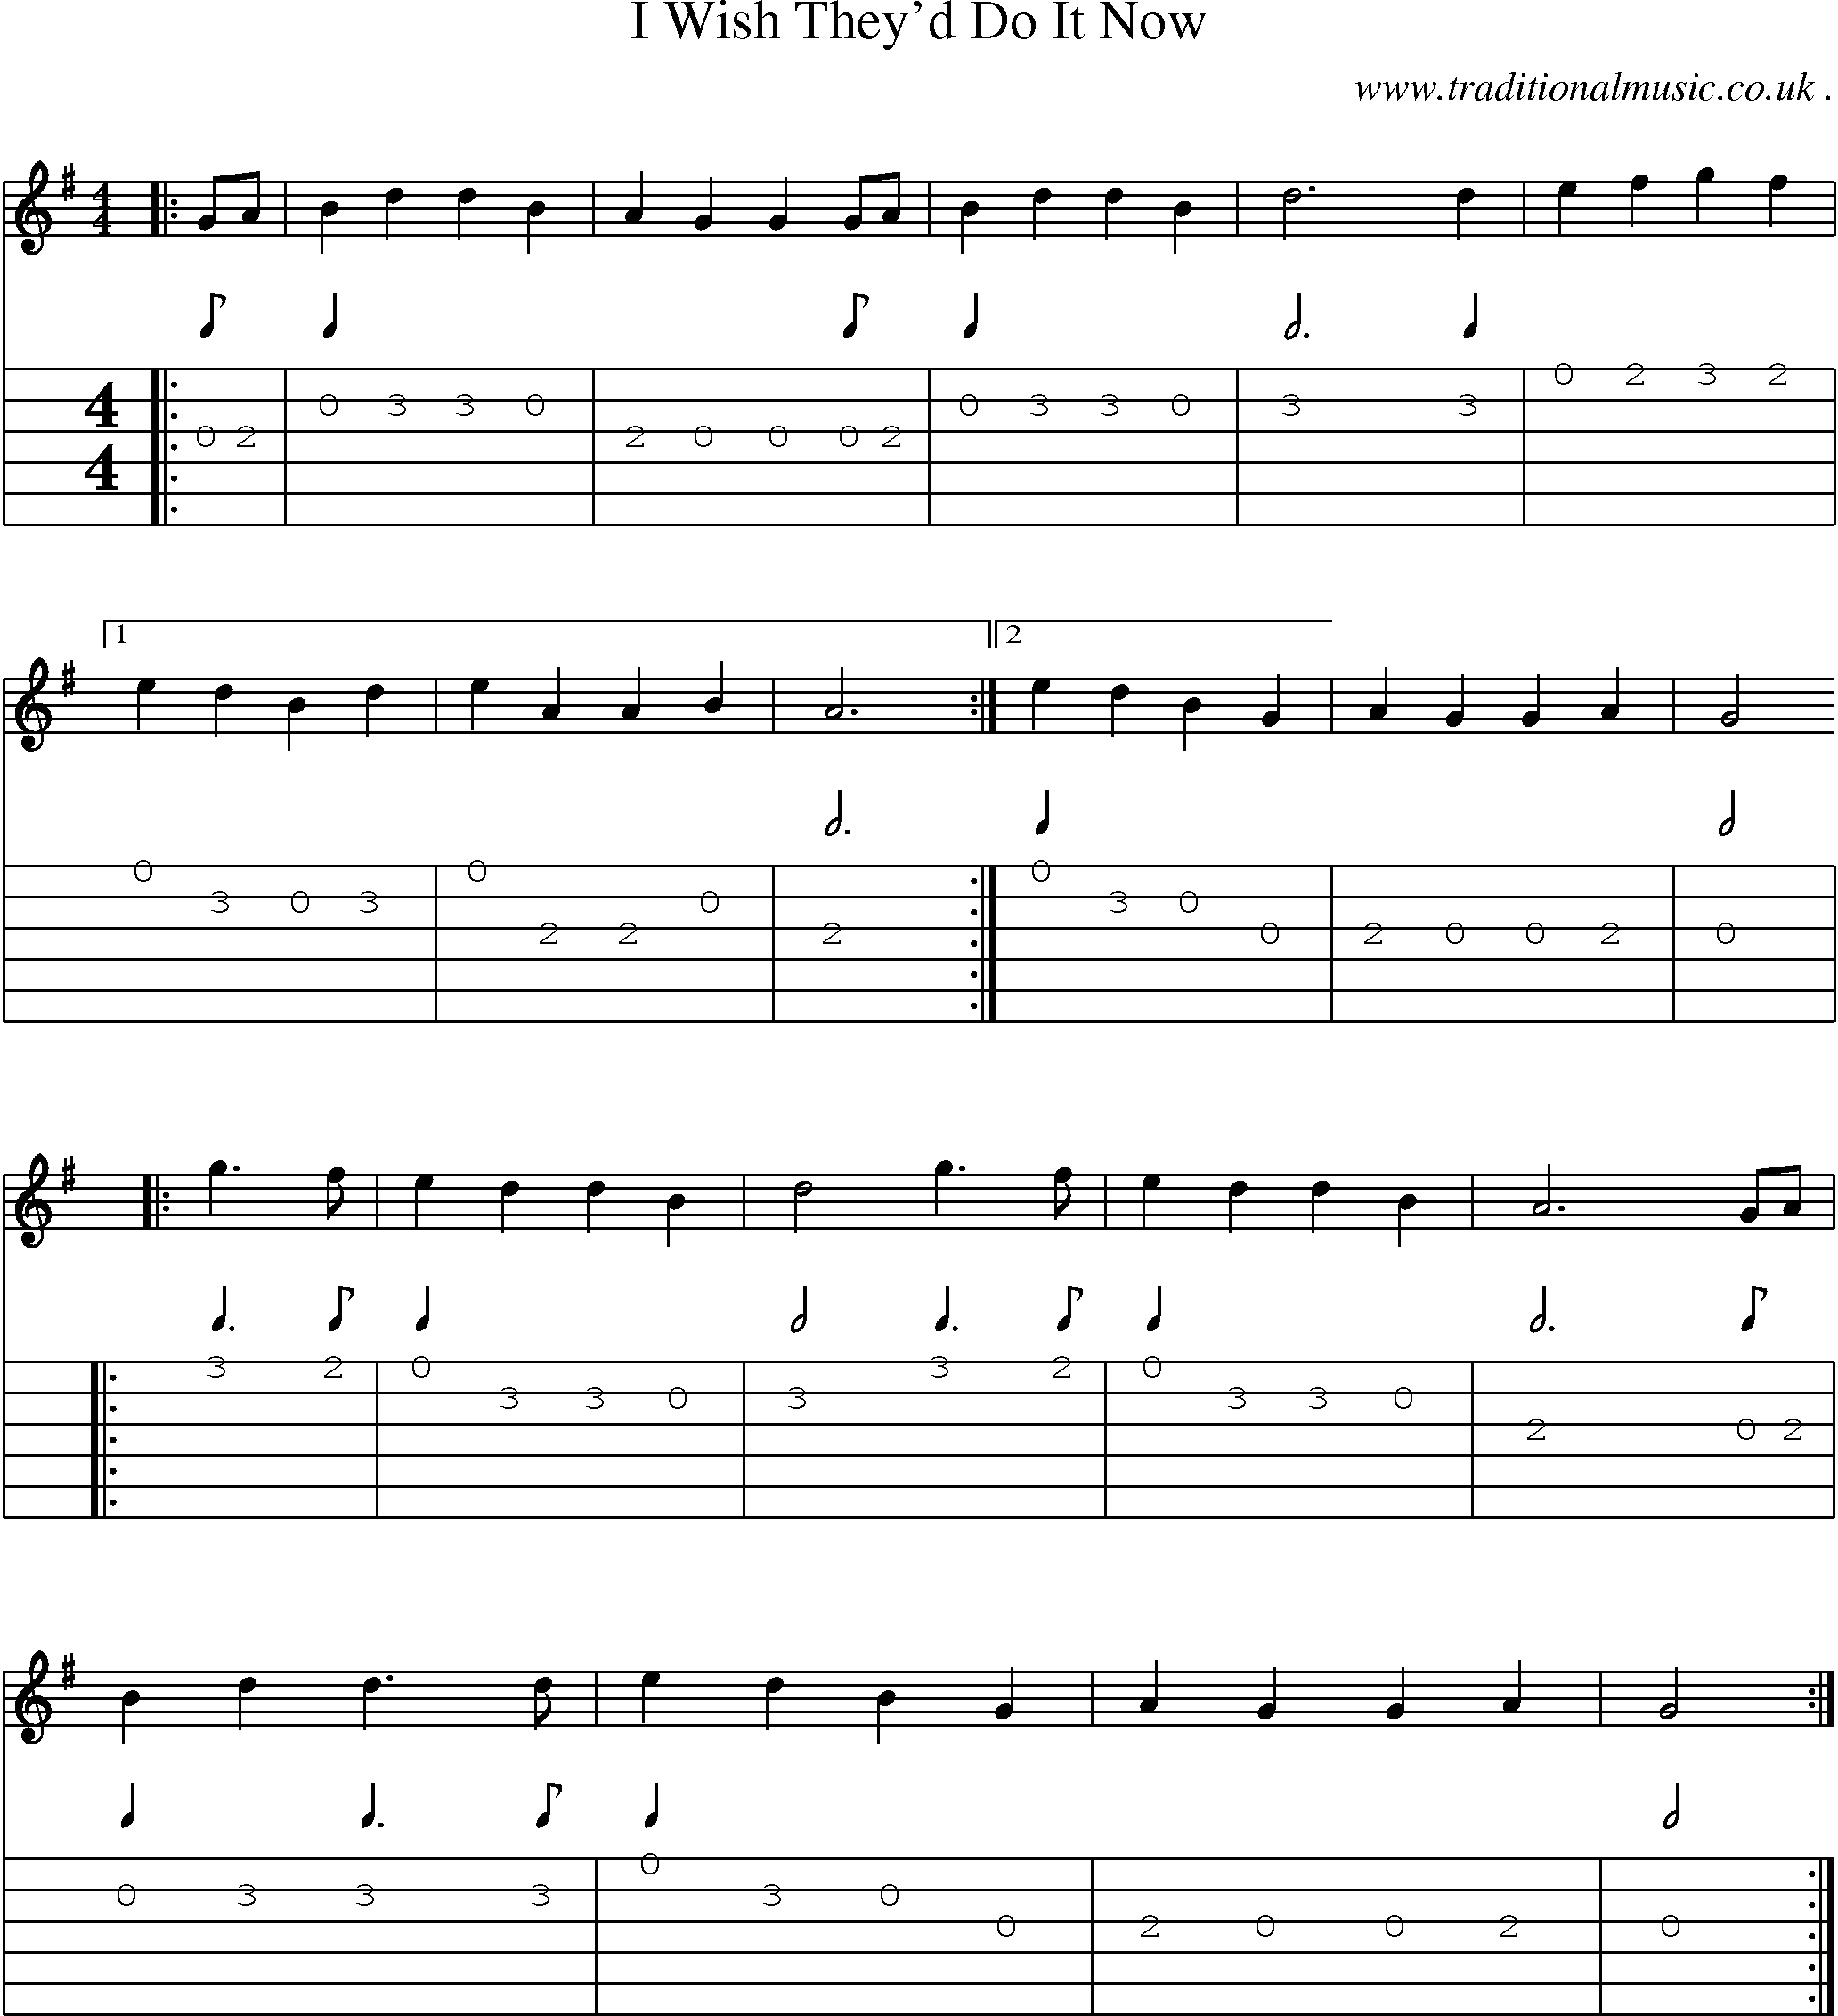 Sheet-Music and Guitar Tabs for I Wish Theyd Do It Now